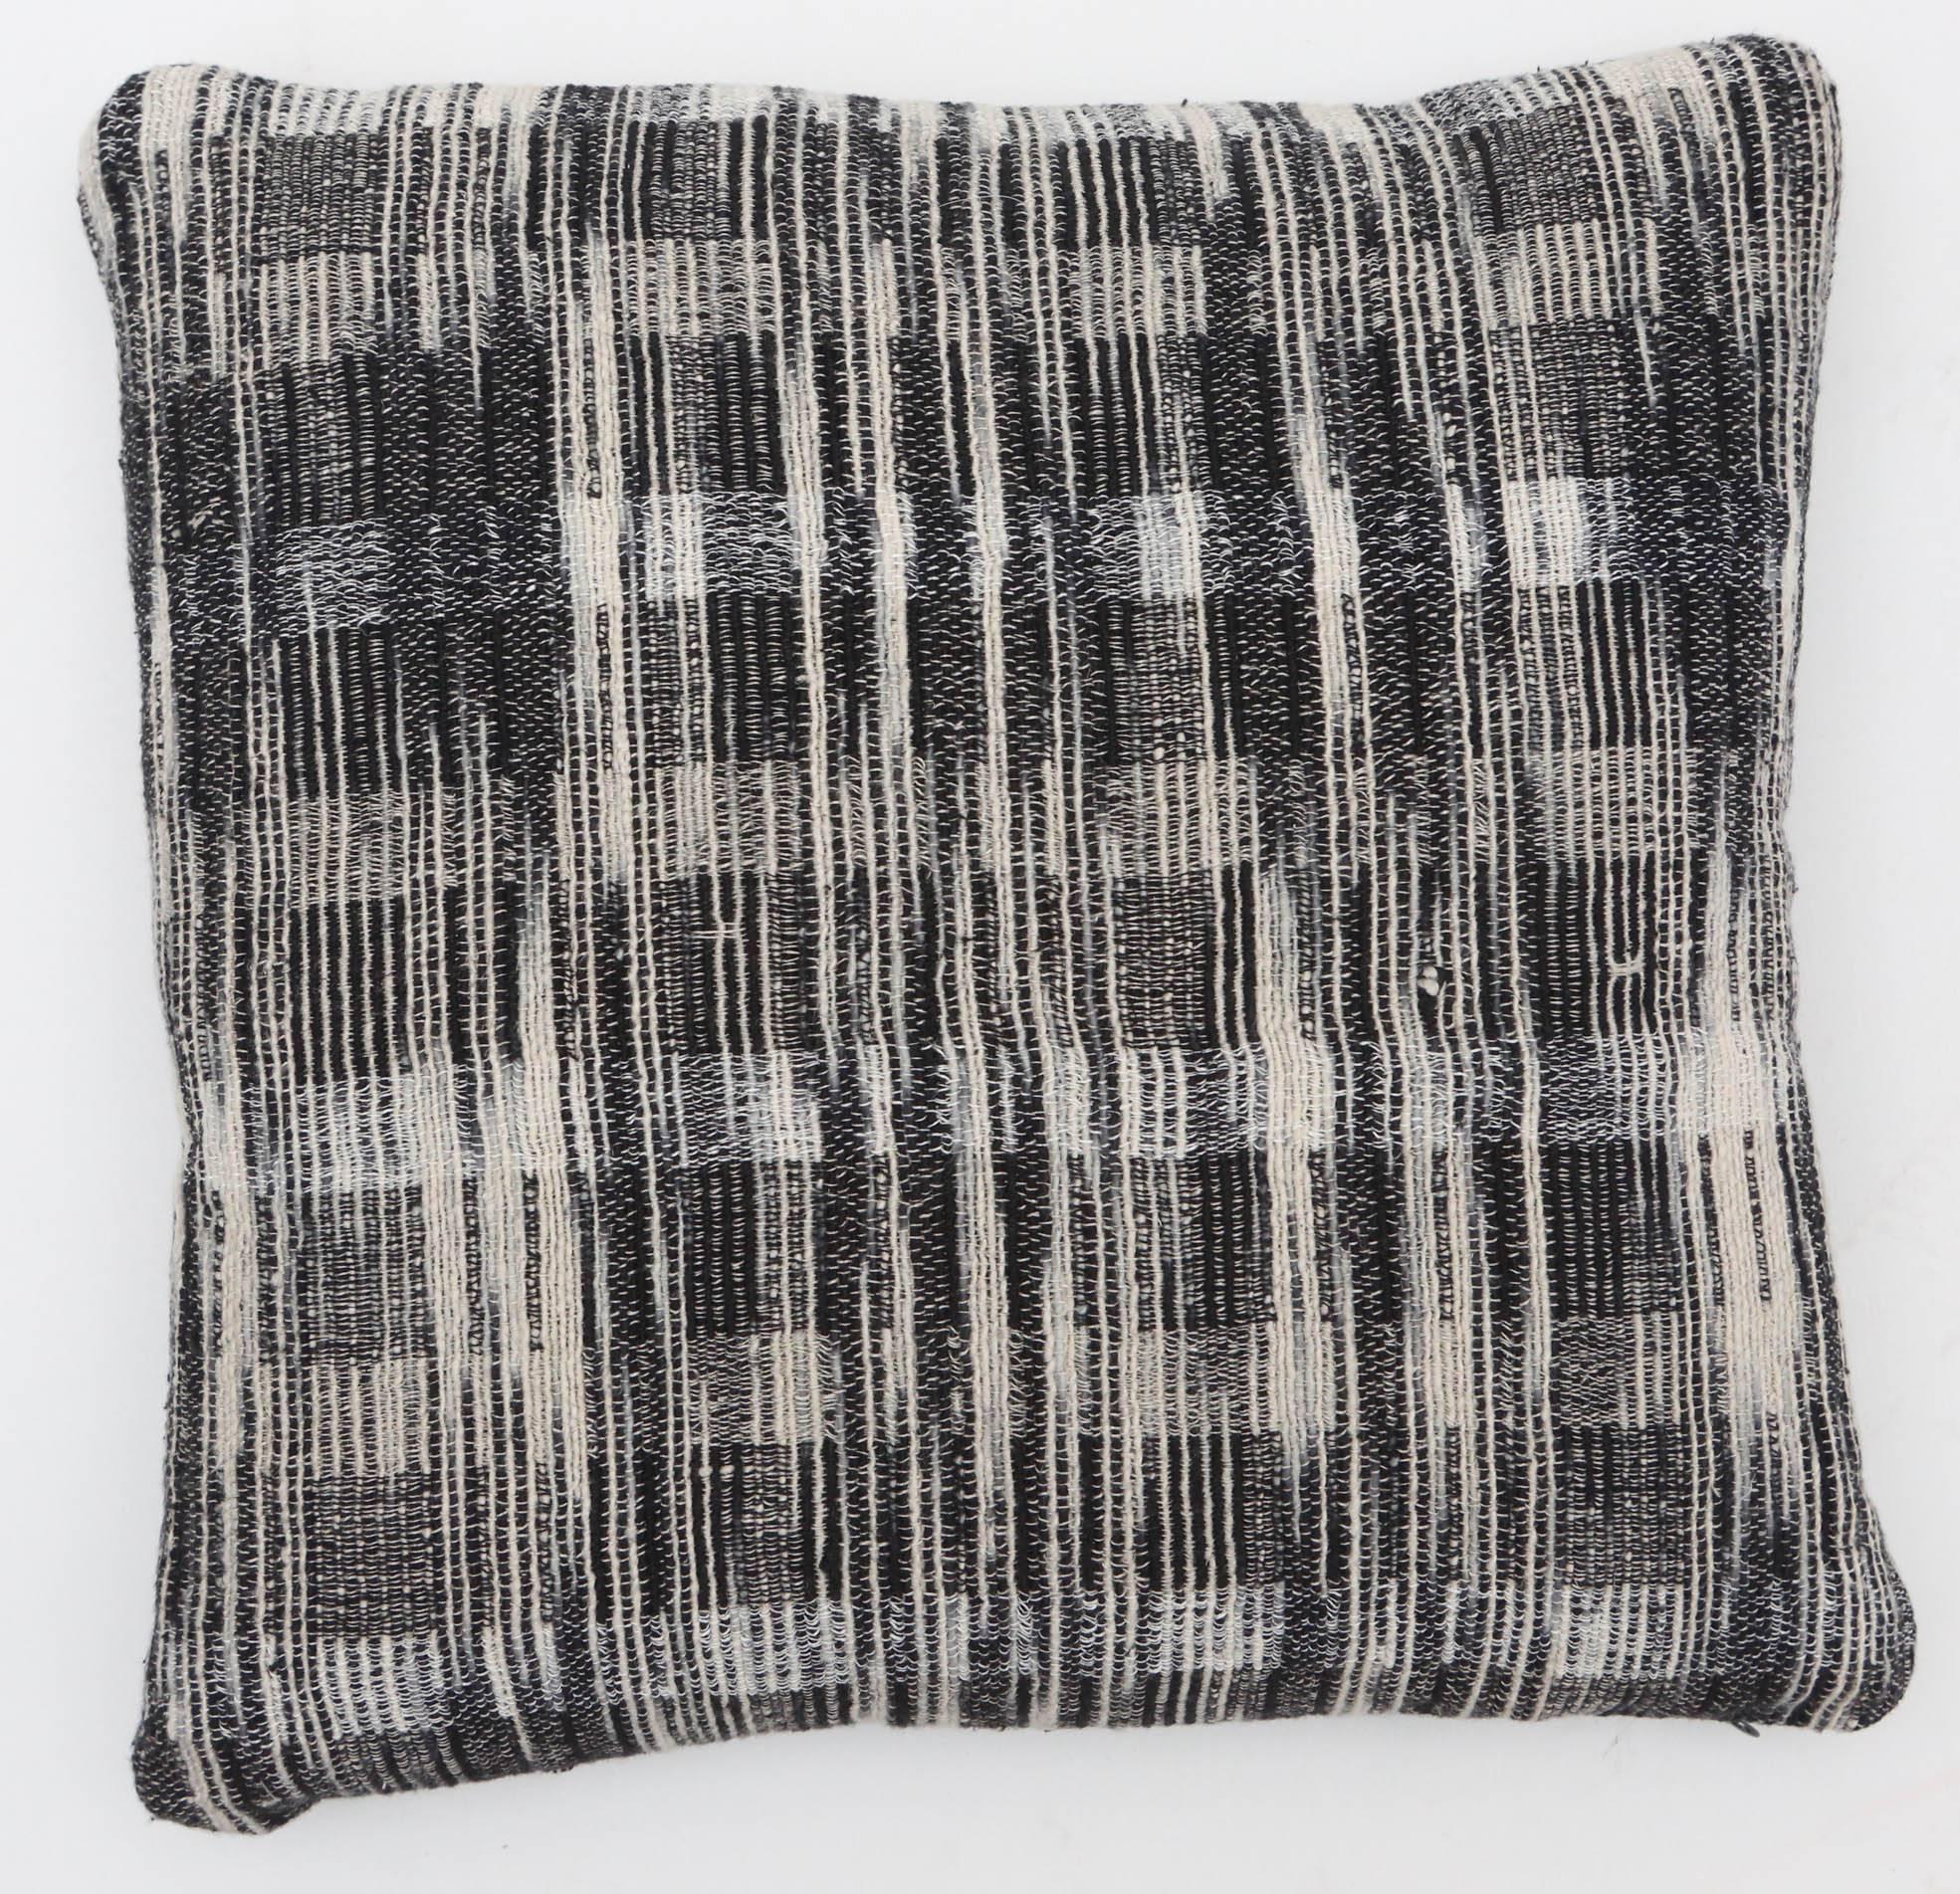 A contemporary line of pillows, throws, bedcovers and yardage hand woven in India on antique Jacquard looms. Handspun wool, cotton, linen, and raw silk give the textiles an appealing uneven quality.

This linen and raw tussar silk pillow has a